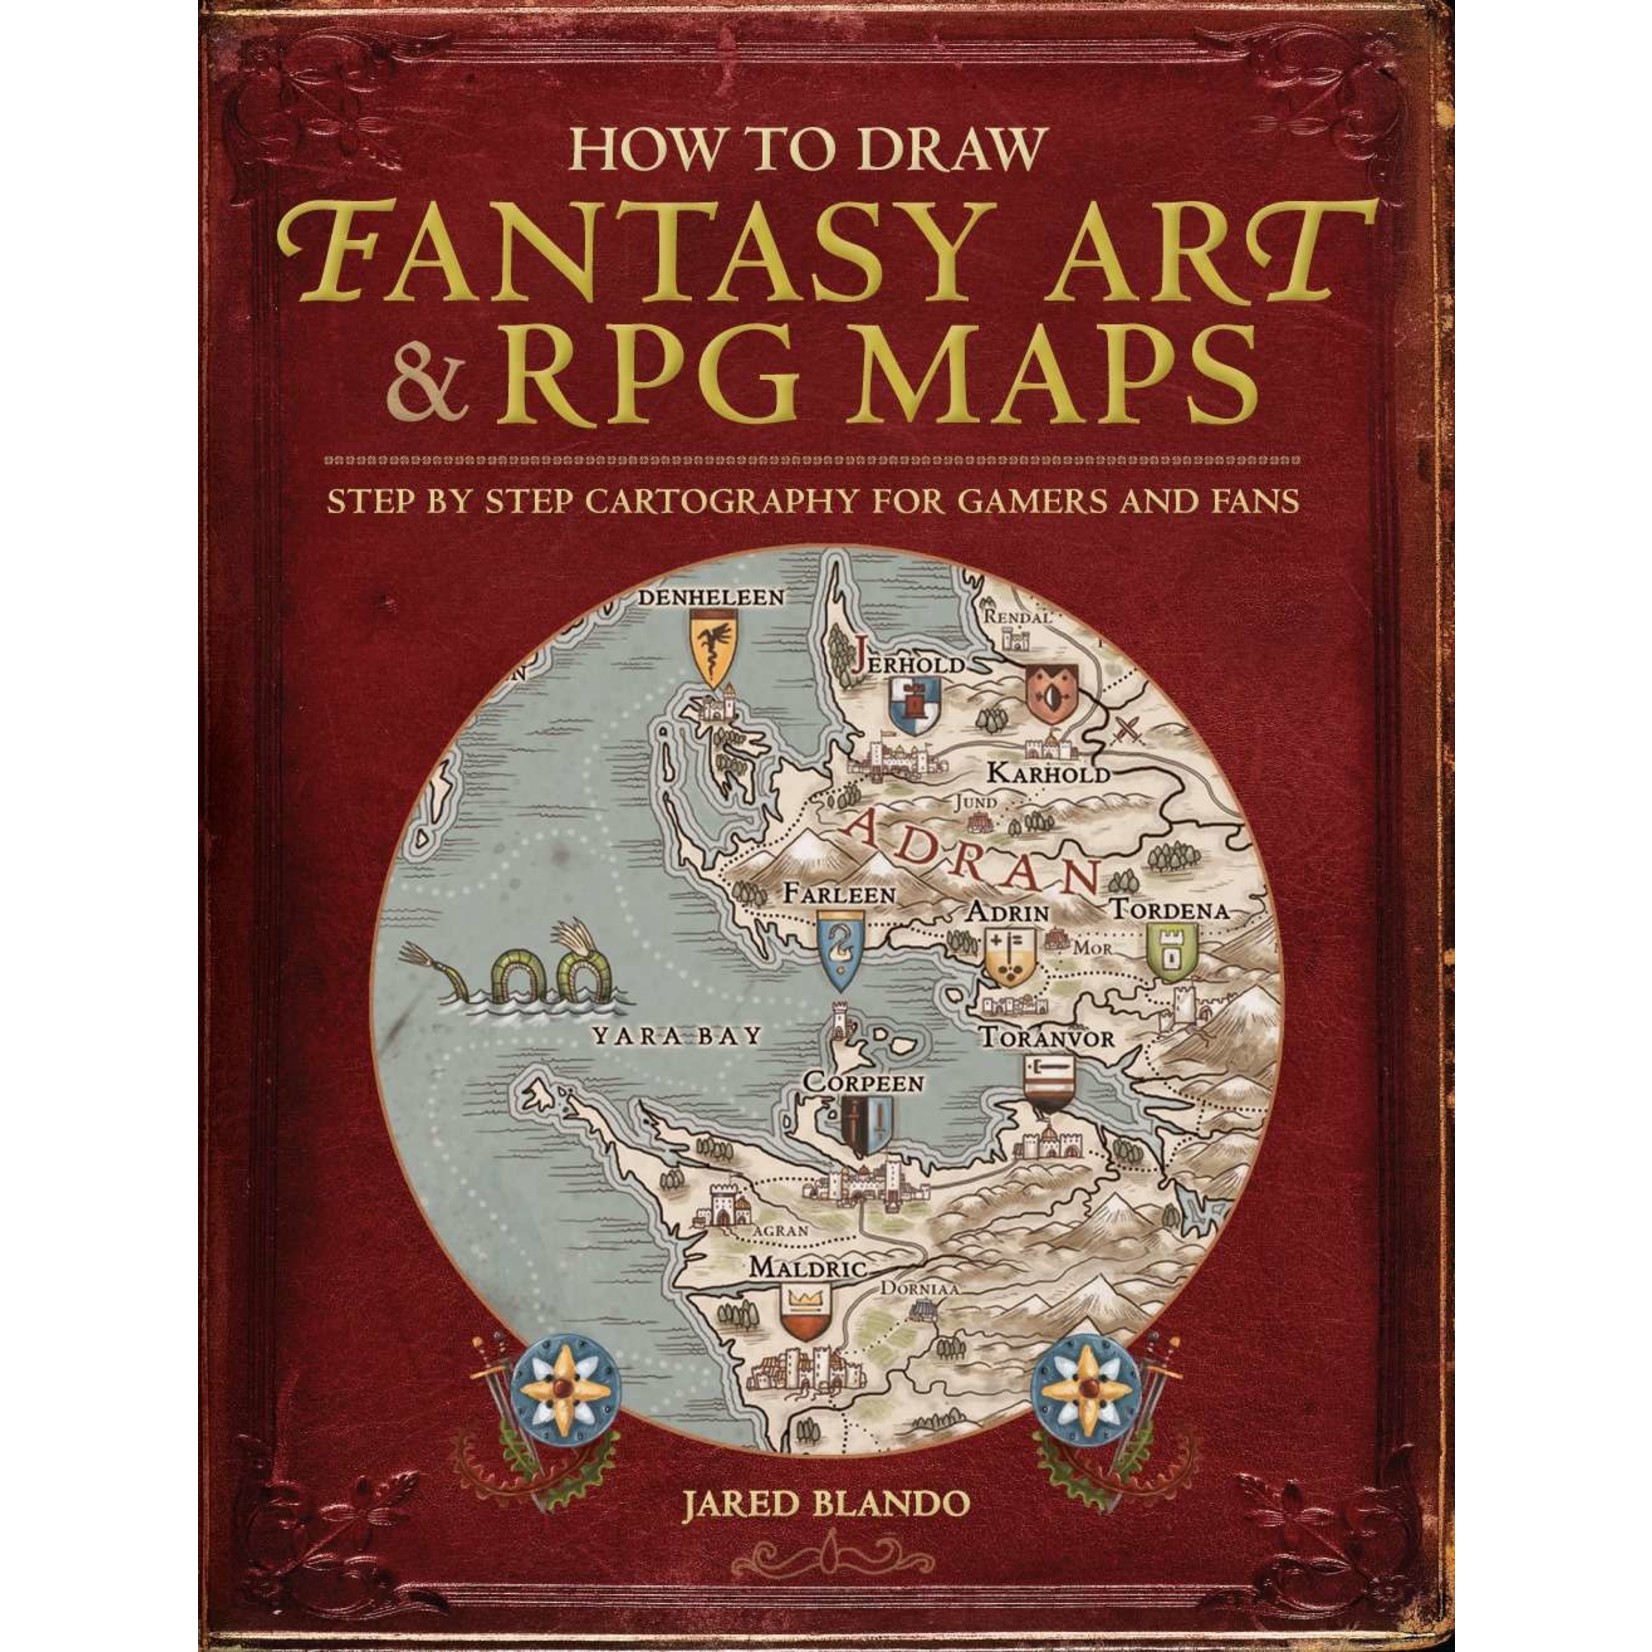 How to Draw Fantasy Art & RPG Maps